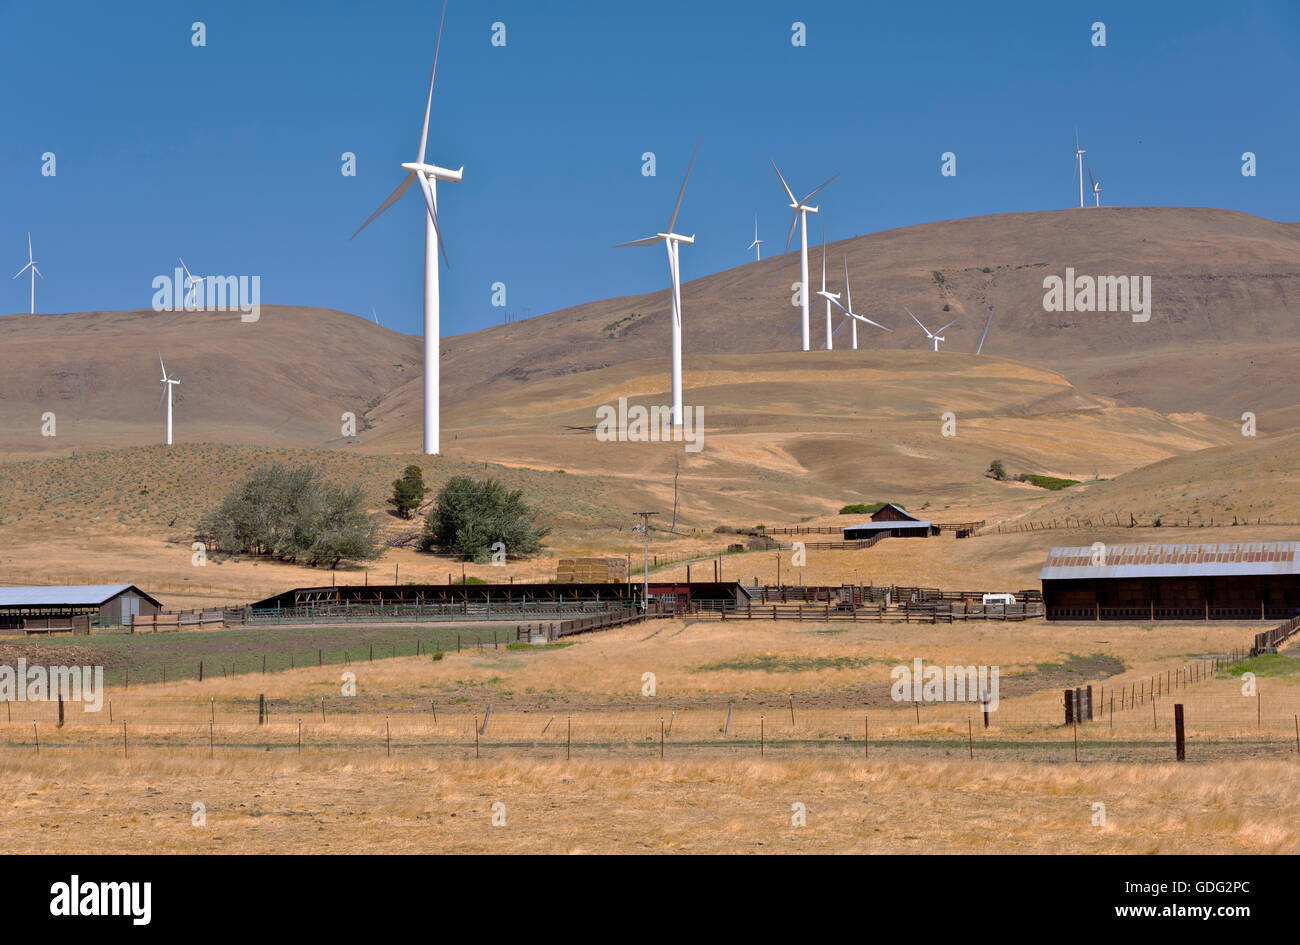 Wind energy generated by large blades spinning on a hill in Washington state. Stock Photo